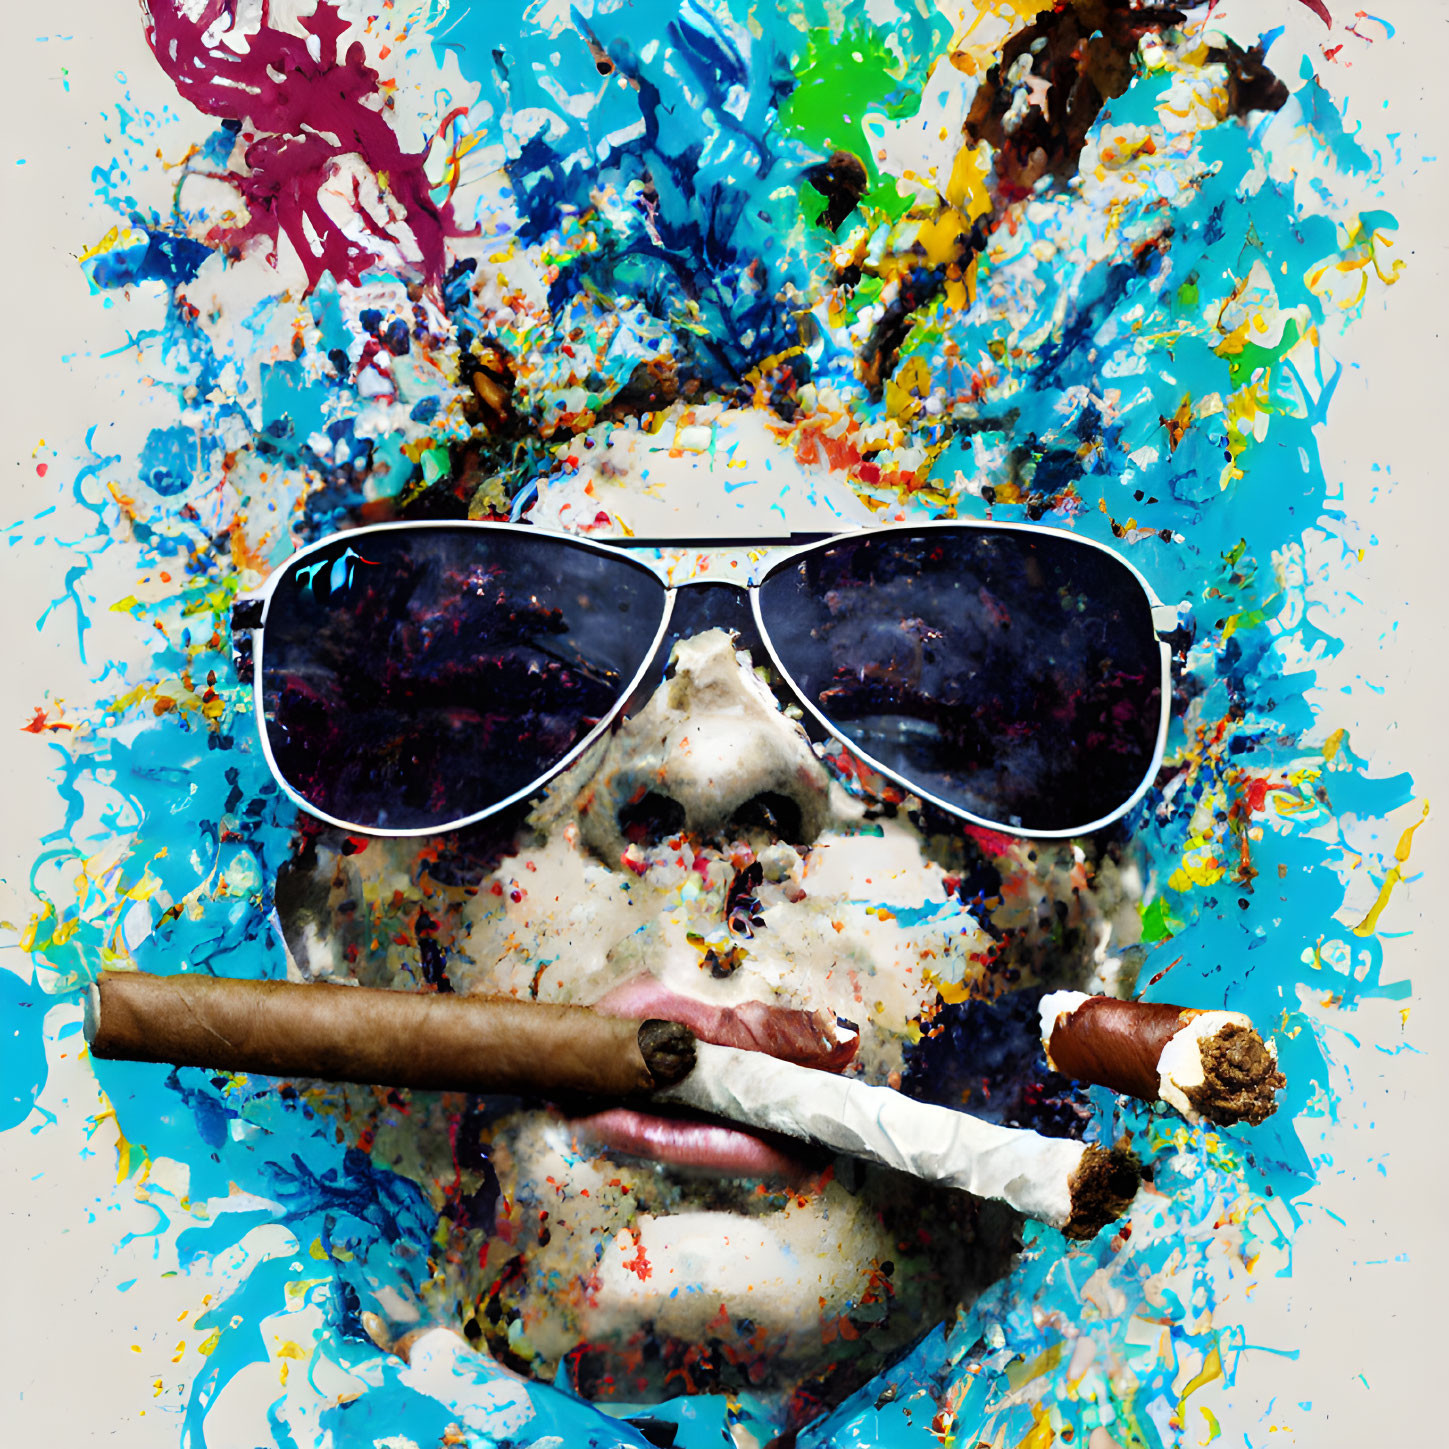 Colorful portrait of person in sunglasses smoking cigar against vibrant paint splashes